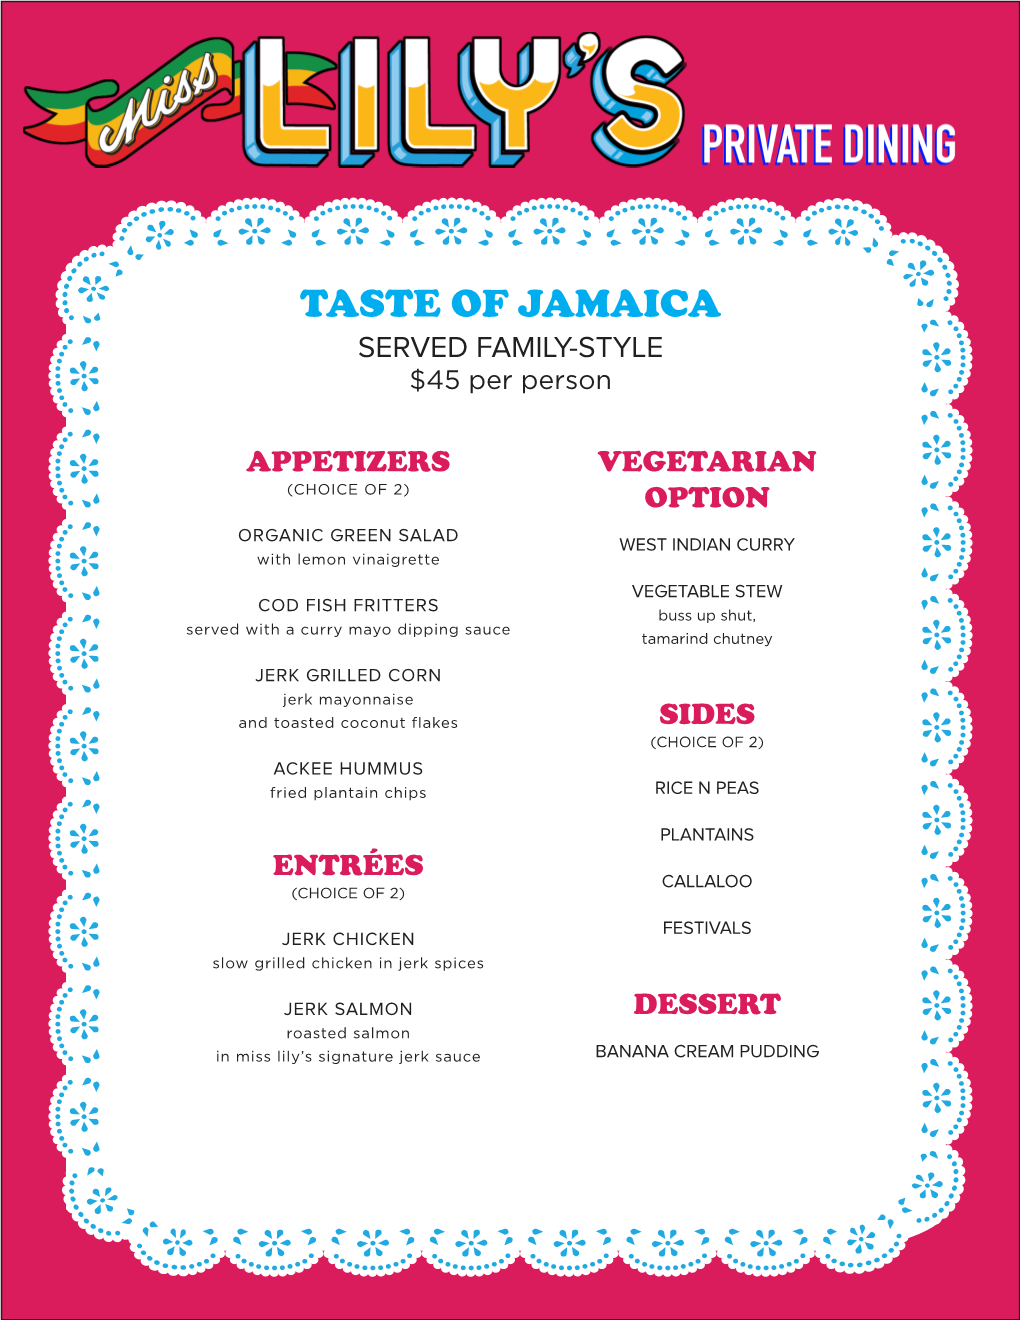 TASTE of JAMAICA SERVED FAMILY-STYLE $45 Per Person